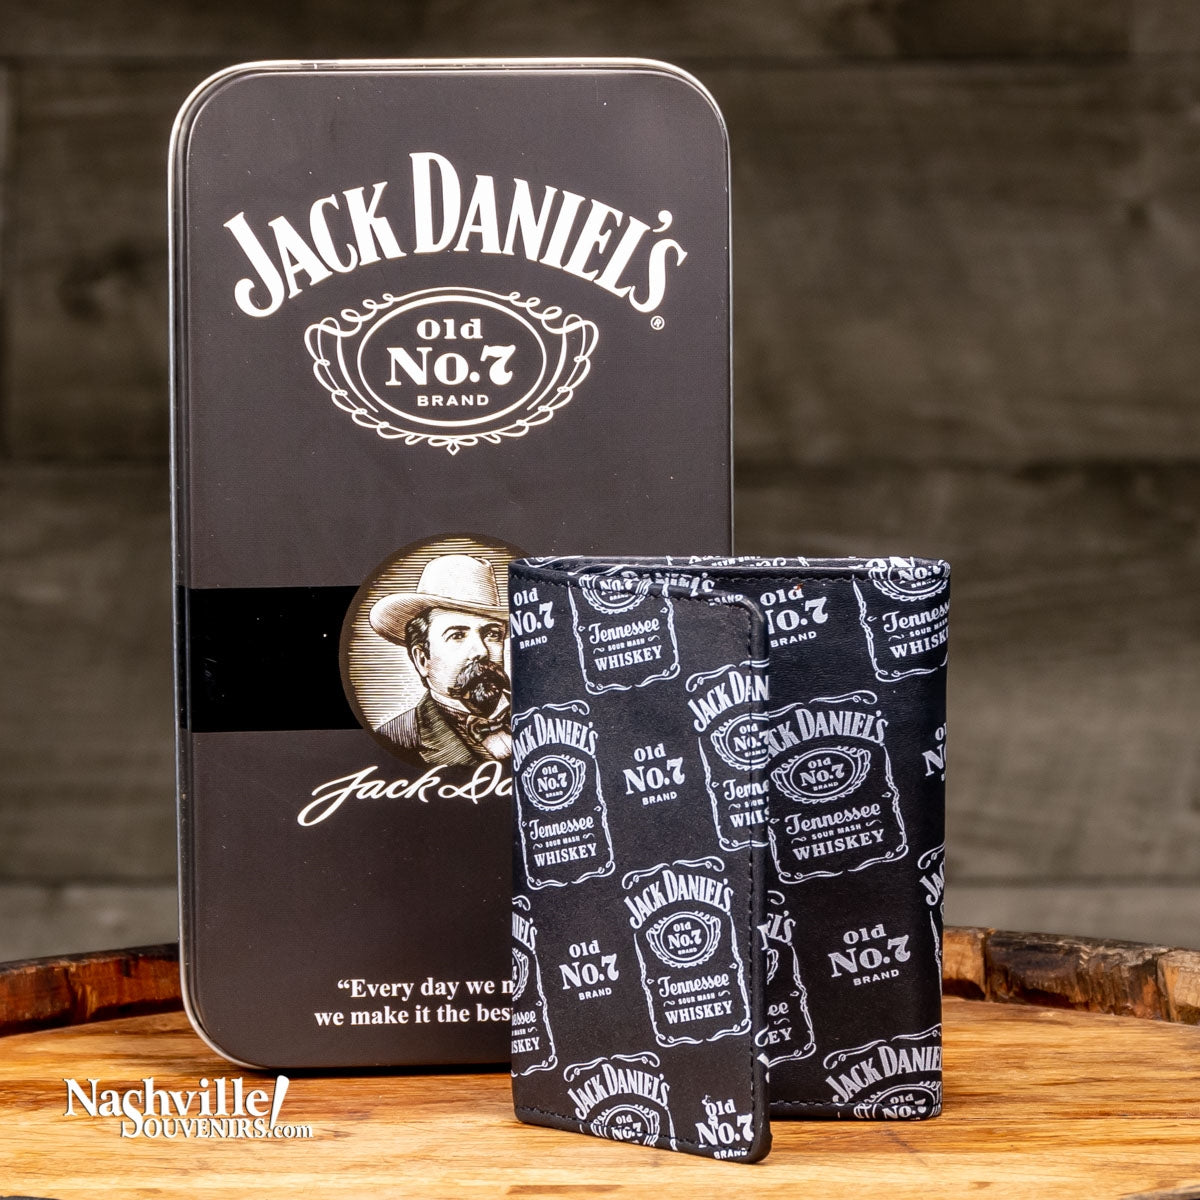 Jack Daniel's Signature Label Trifold Wallet. This great wallet features multiple JD bottle label logos printed in white against a black leather background. Get one today with FREE SHIPPING on all US orders over $75!